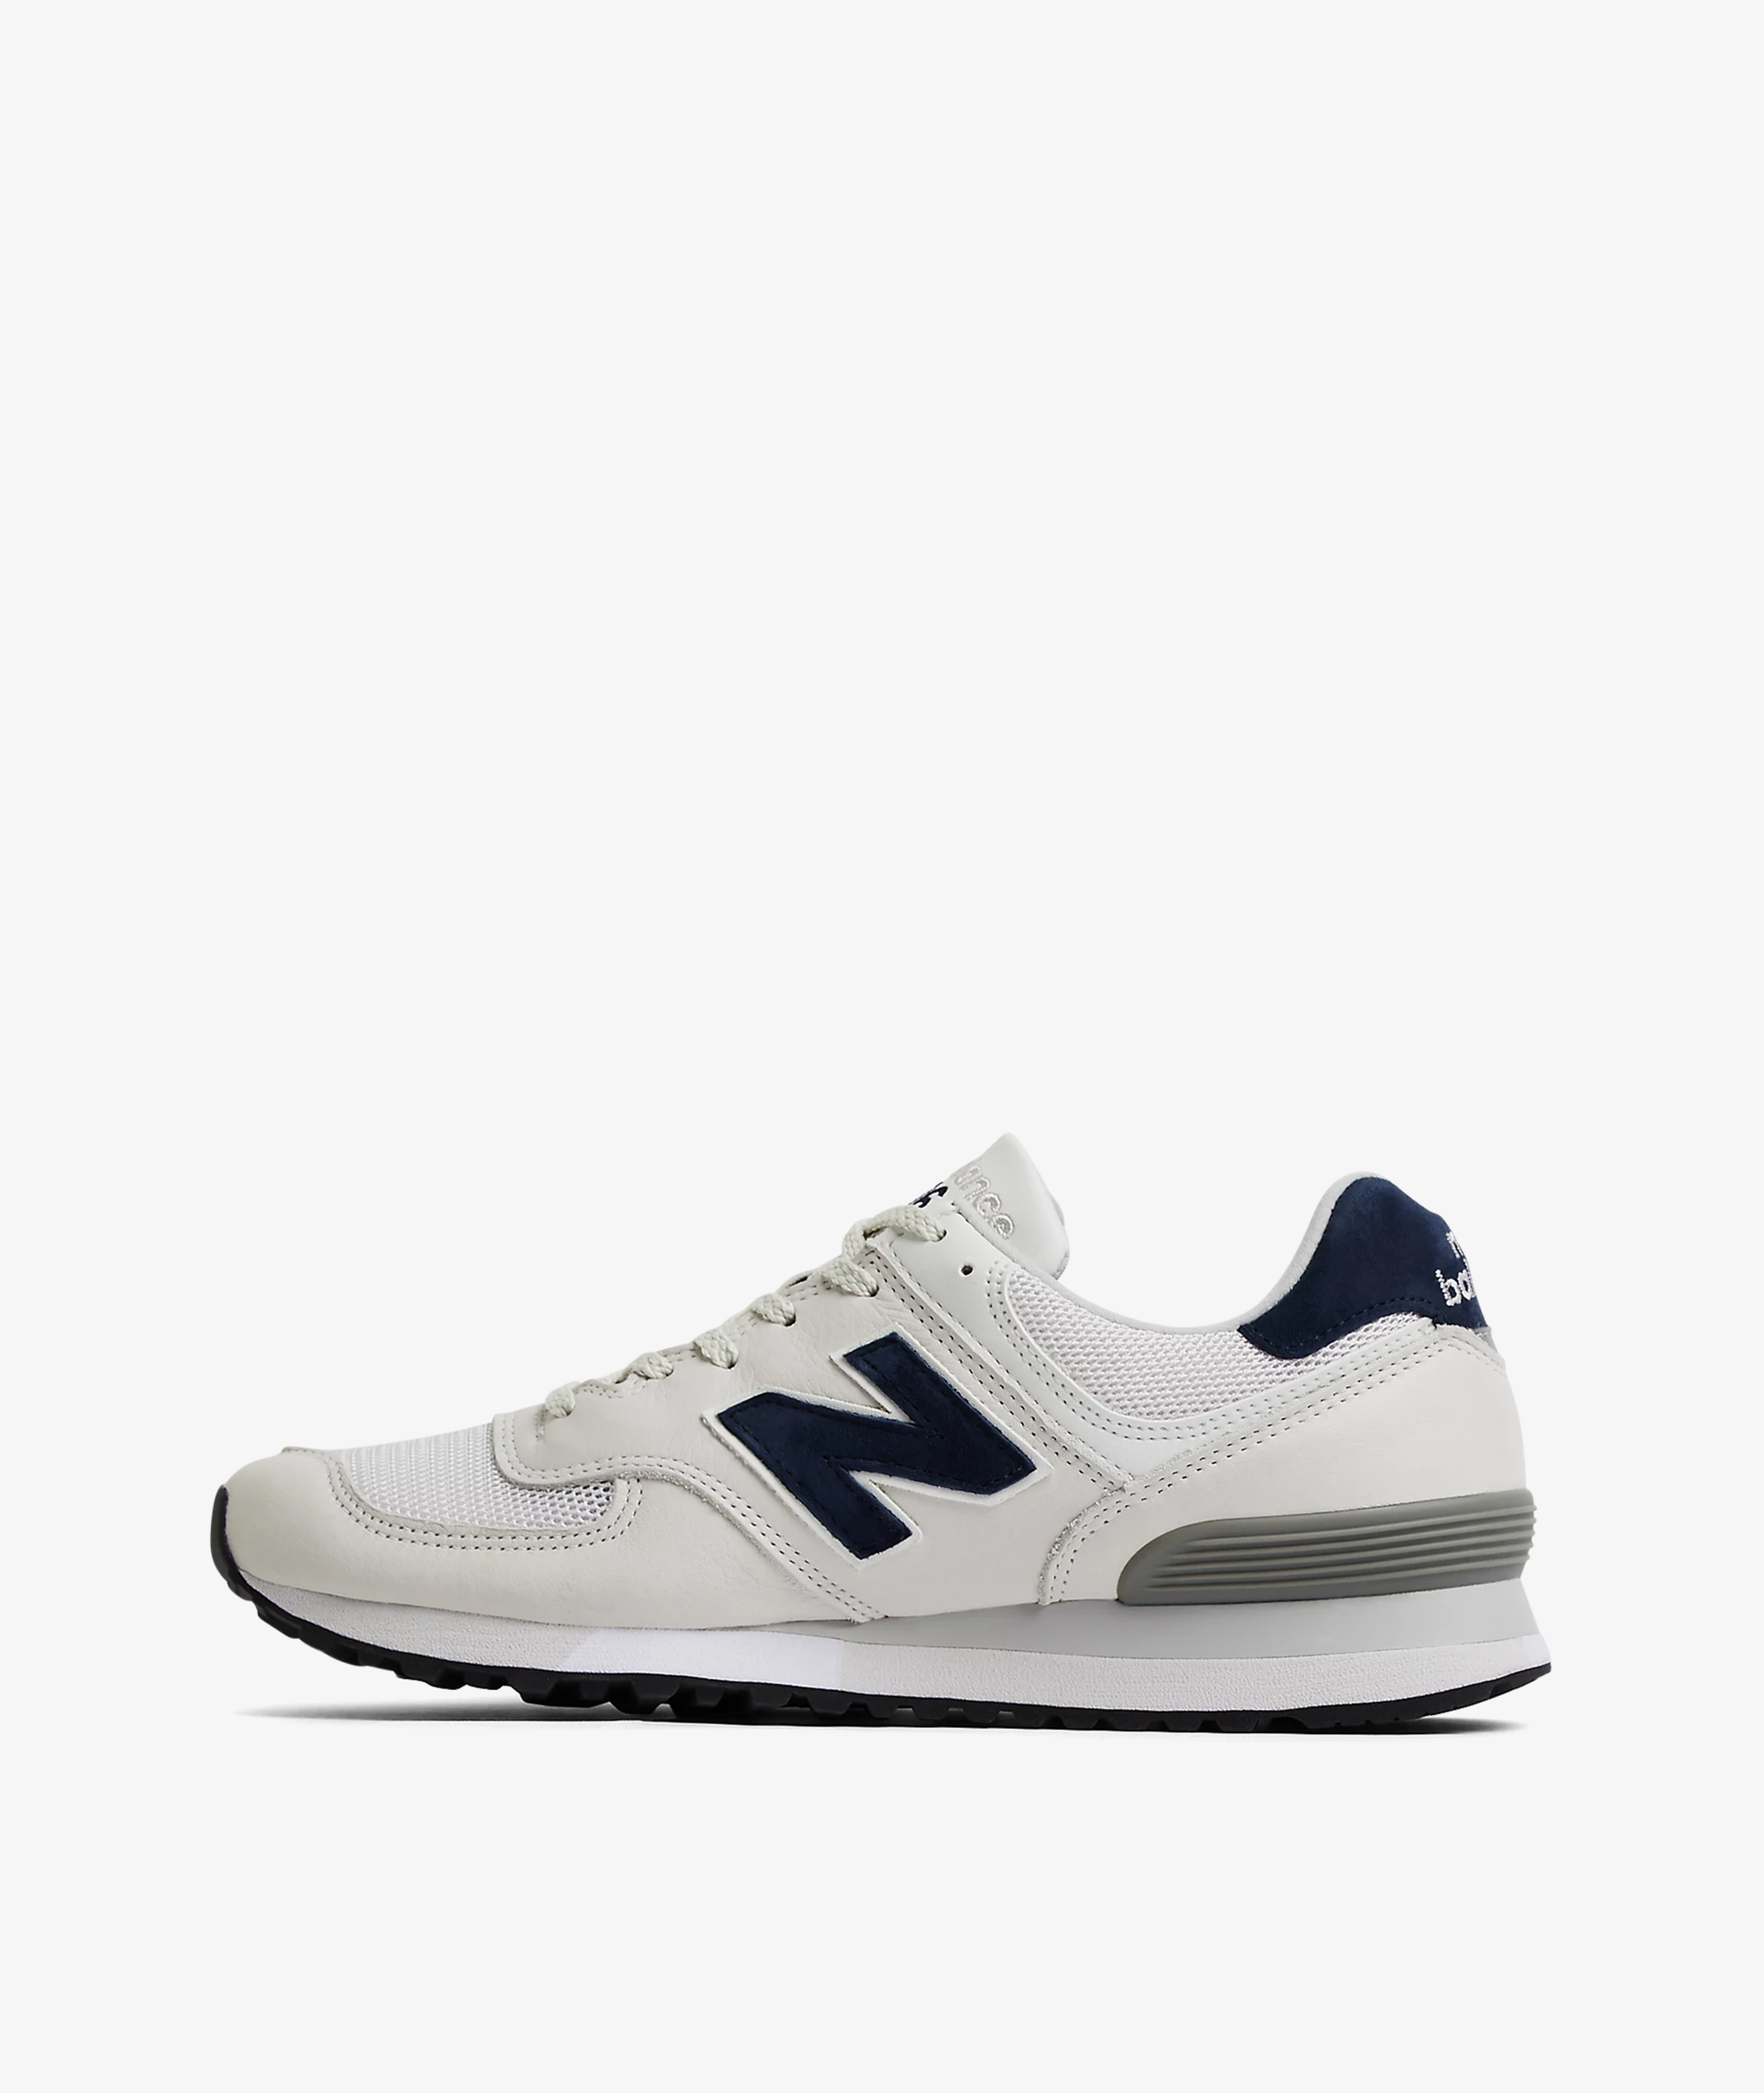 Norse Store | Shipping Worldwide - New Balance OU576LWG - OFF